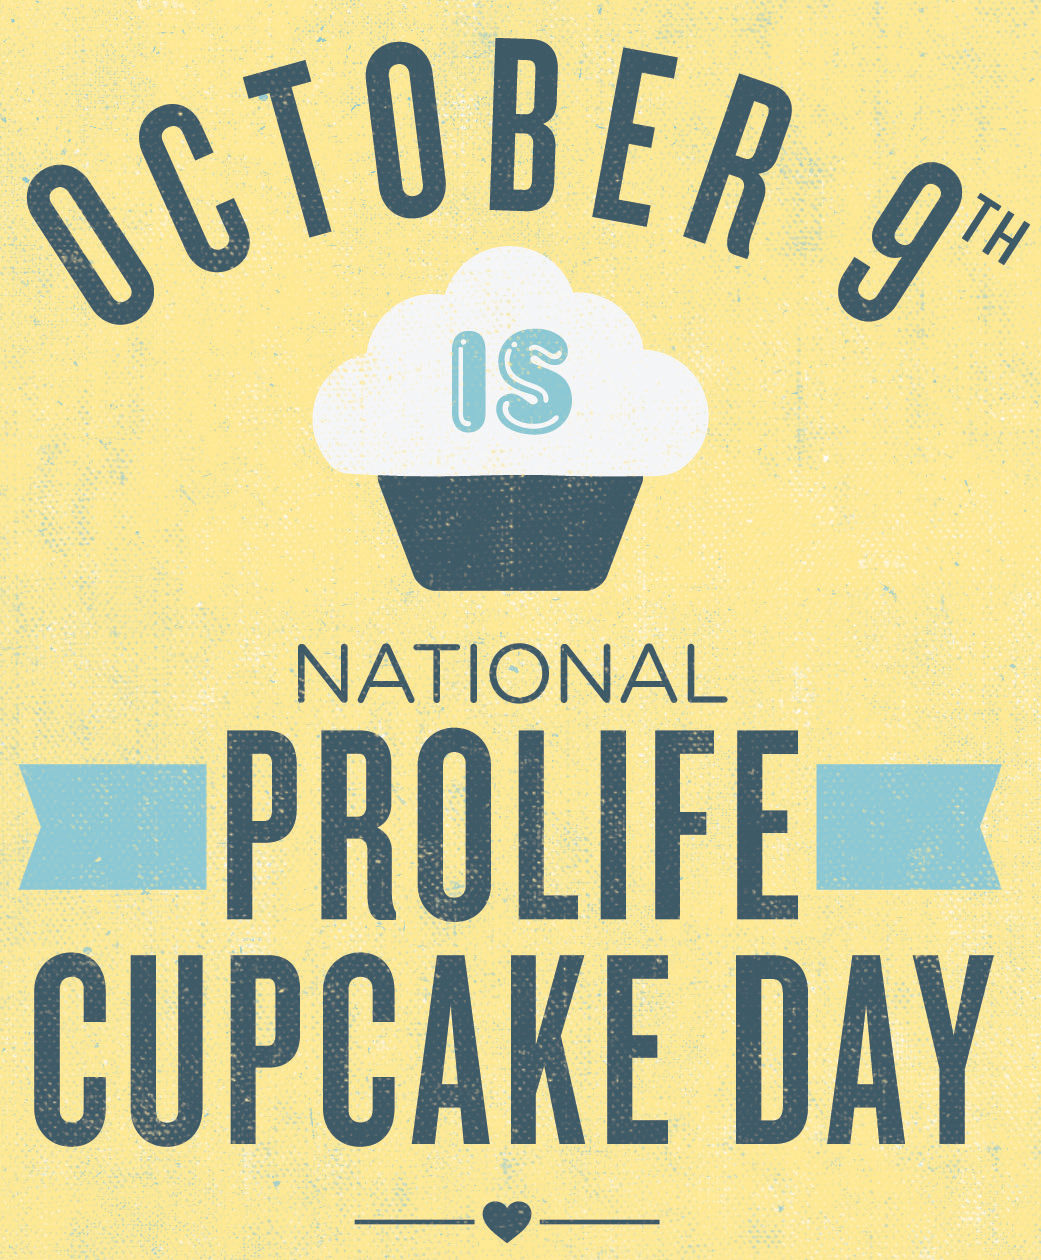 Pro-Life Cup Cake Day - Also known as Cup Cakes for Life. Help raise awareness of Pro-Life and babies killed from abortion cup cakes. #ProLifeCupCakeDay